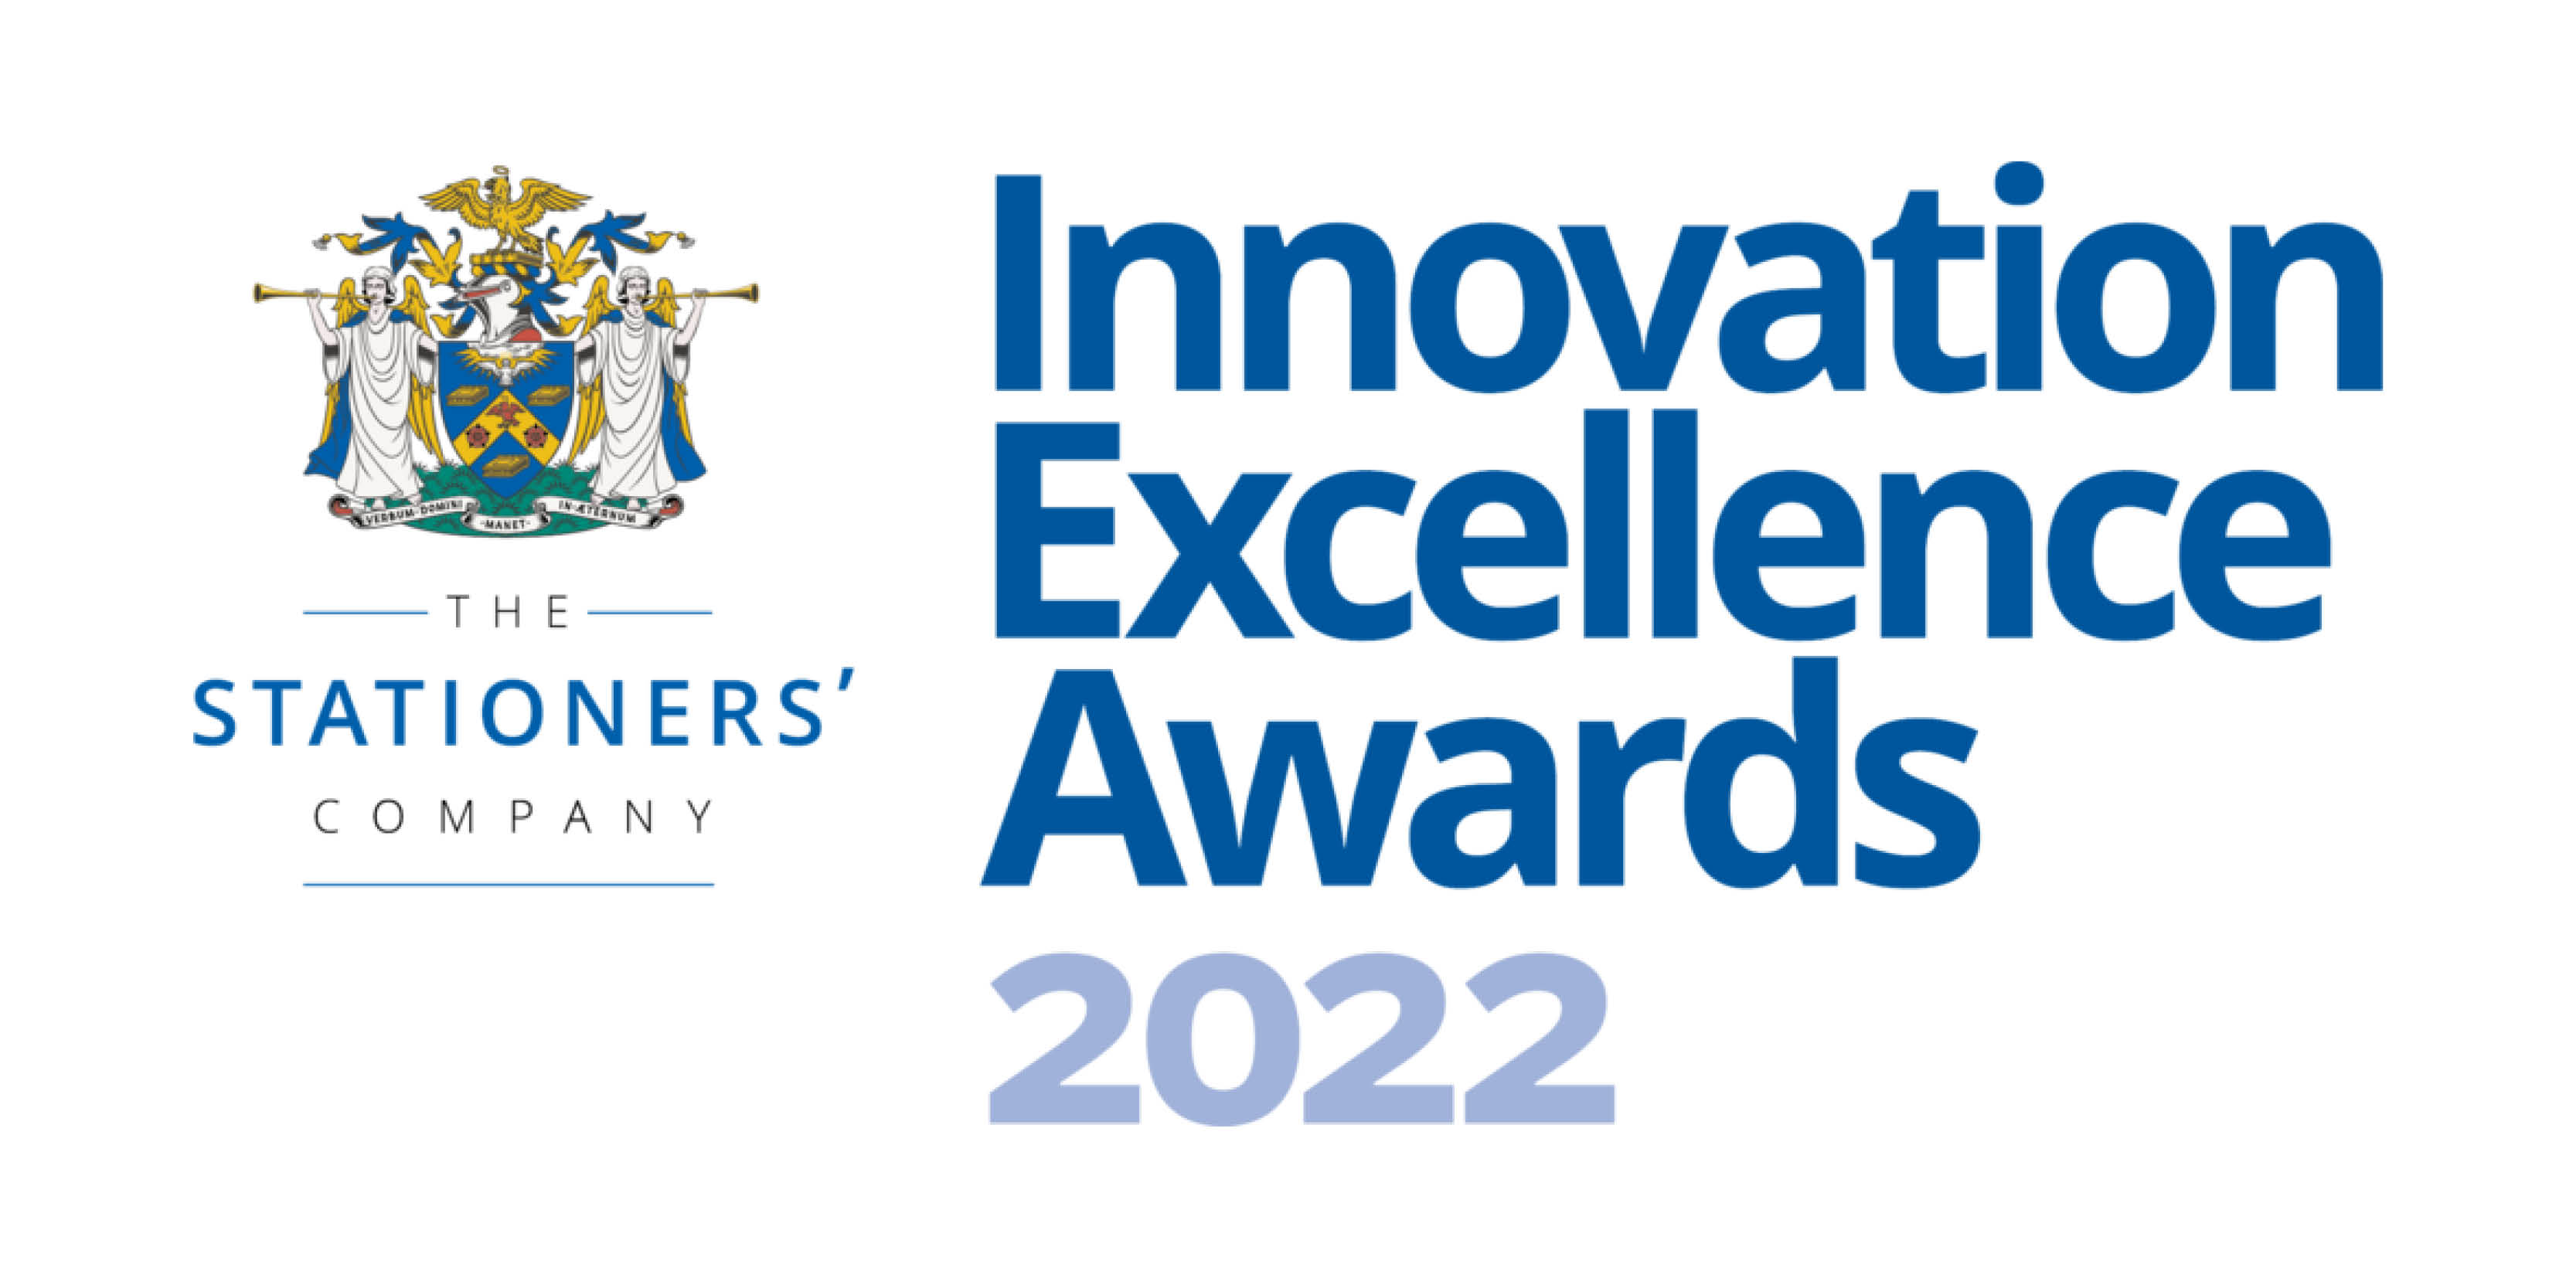 Changes at the Chair and for sponsors announced as the Stationers’ Company celebrates the 10th Innovation Excellence Awards